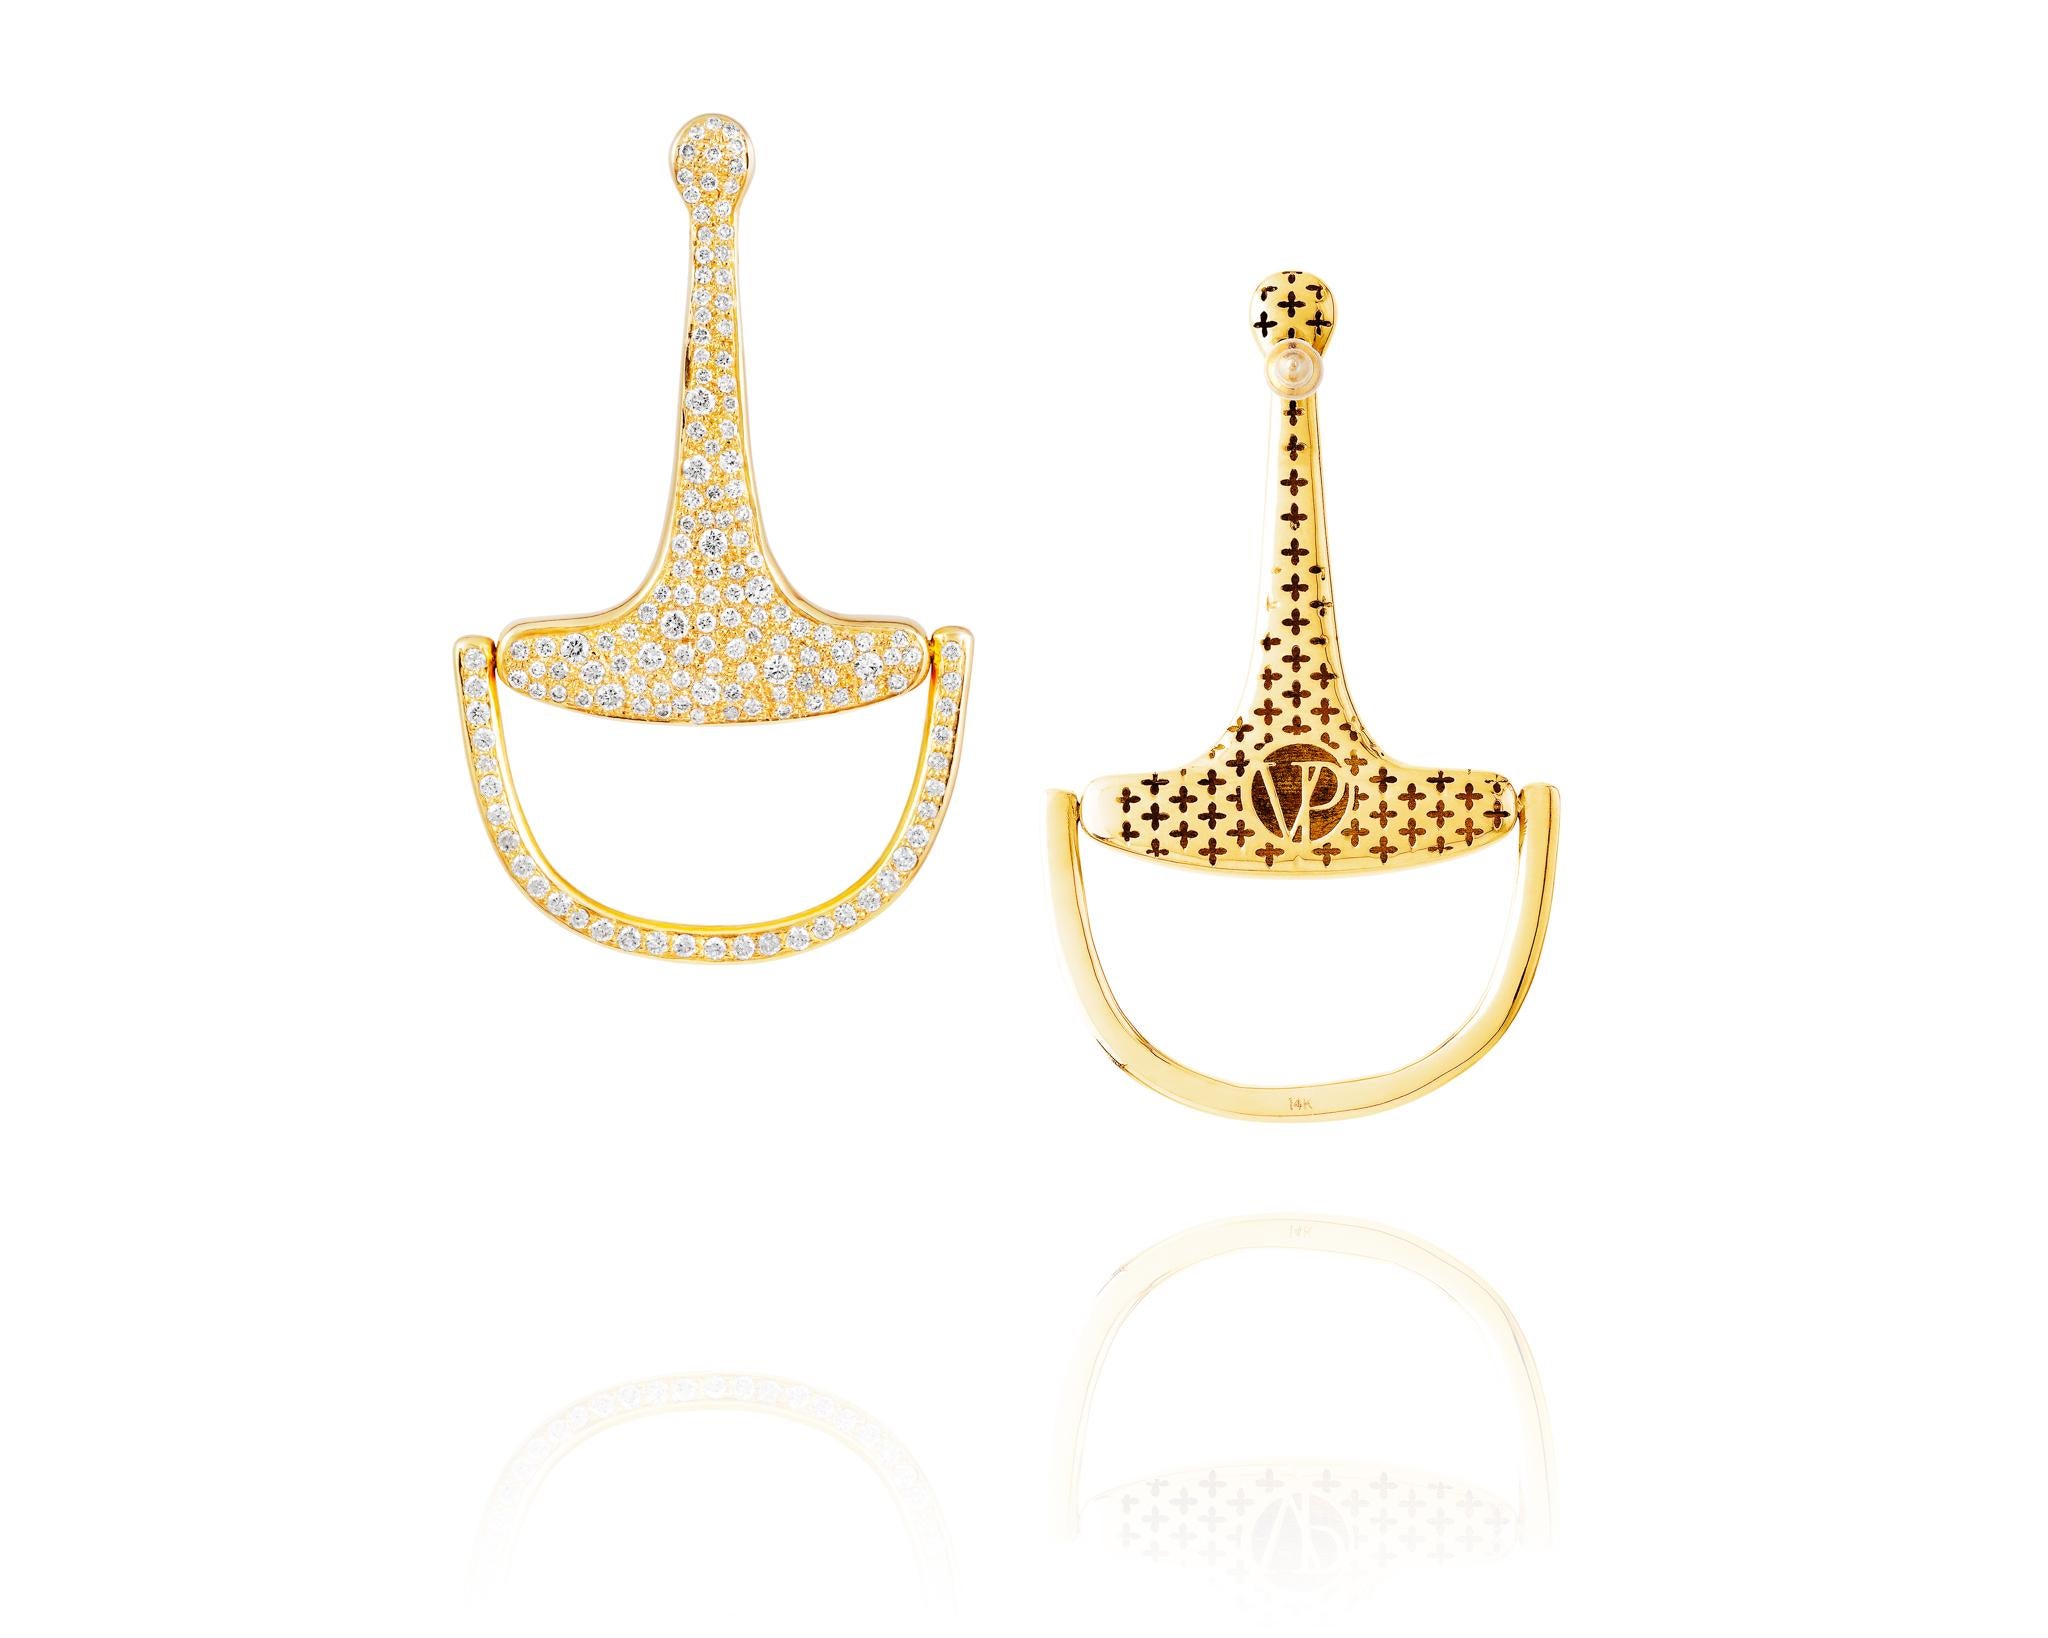 Part of the Vincent Peach Equestrian Collection, the Medium Equestrian Bit Earrings have 2.92ct Diamonds mounted in 14kt Yellow Gold with a hinge to let the bottom move with you and detailed 